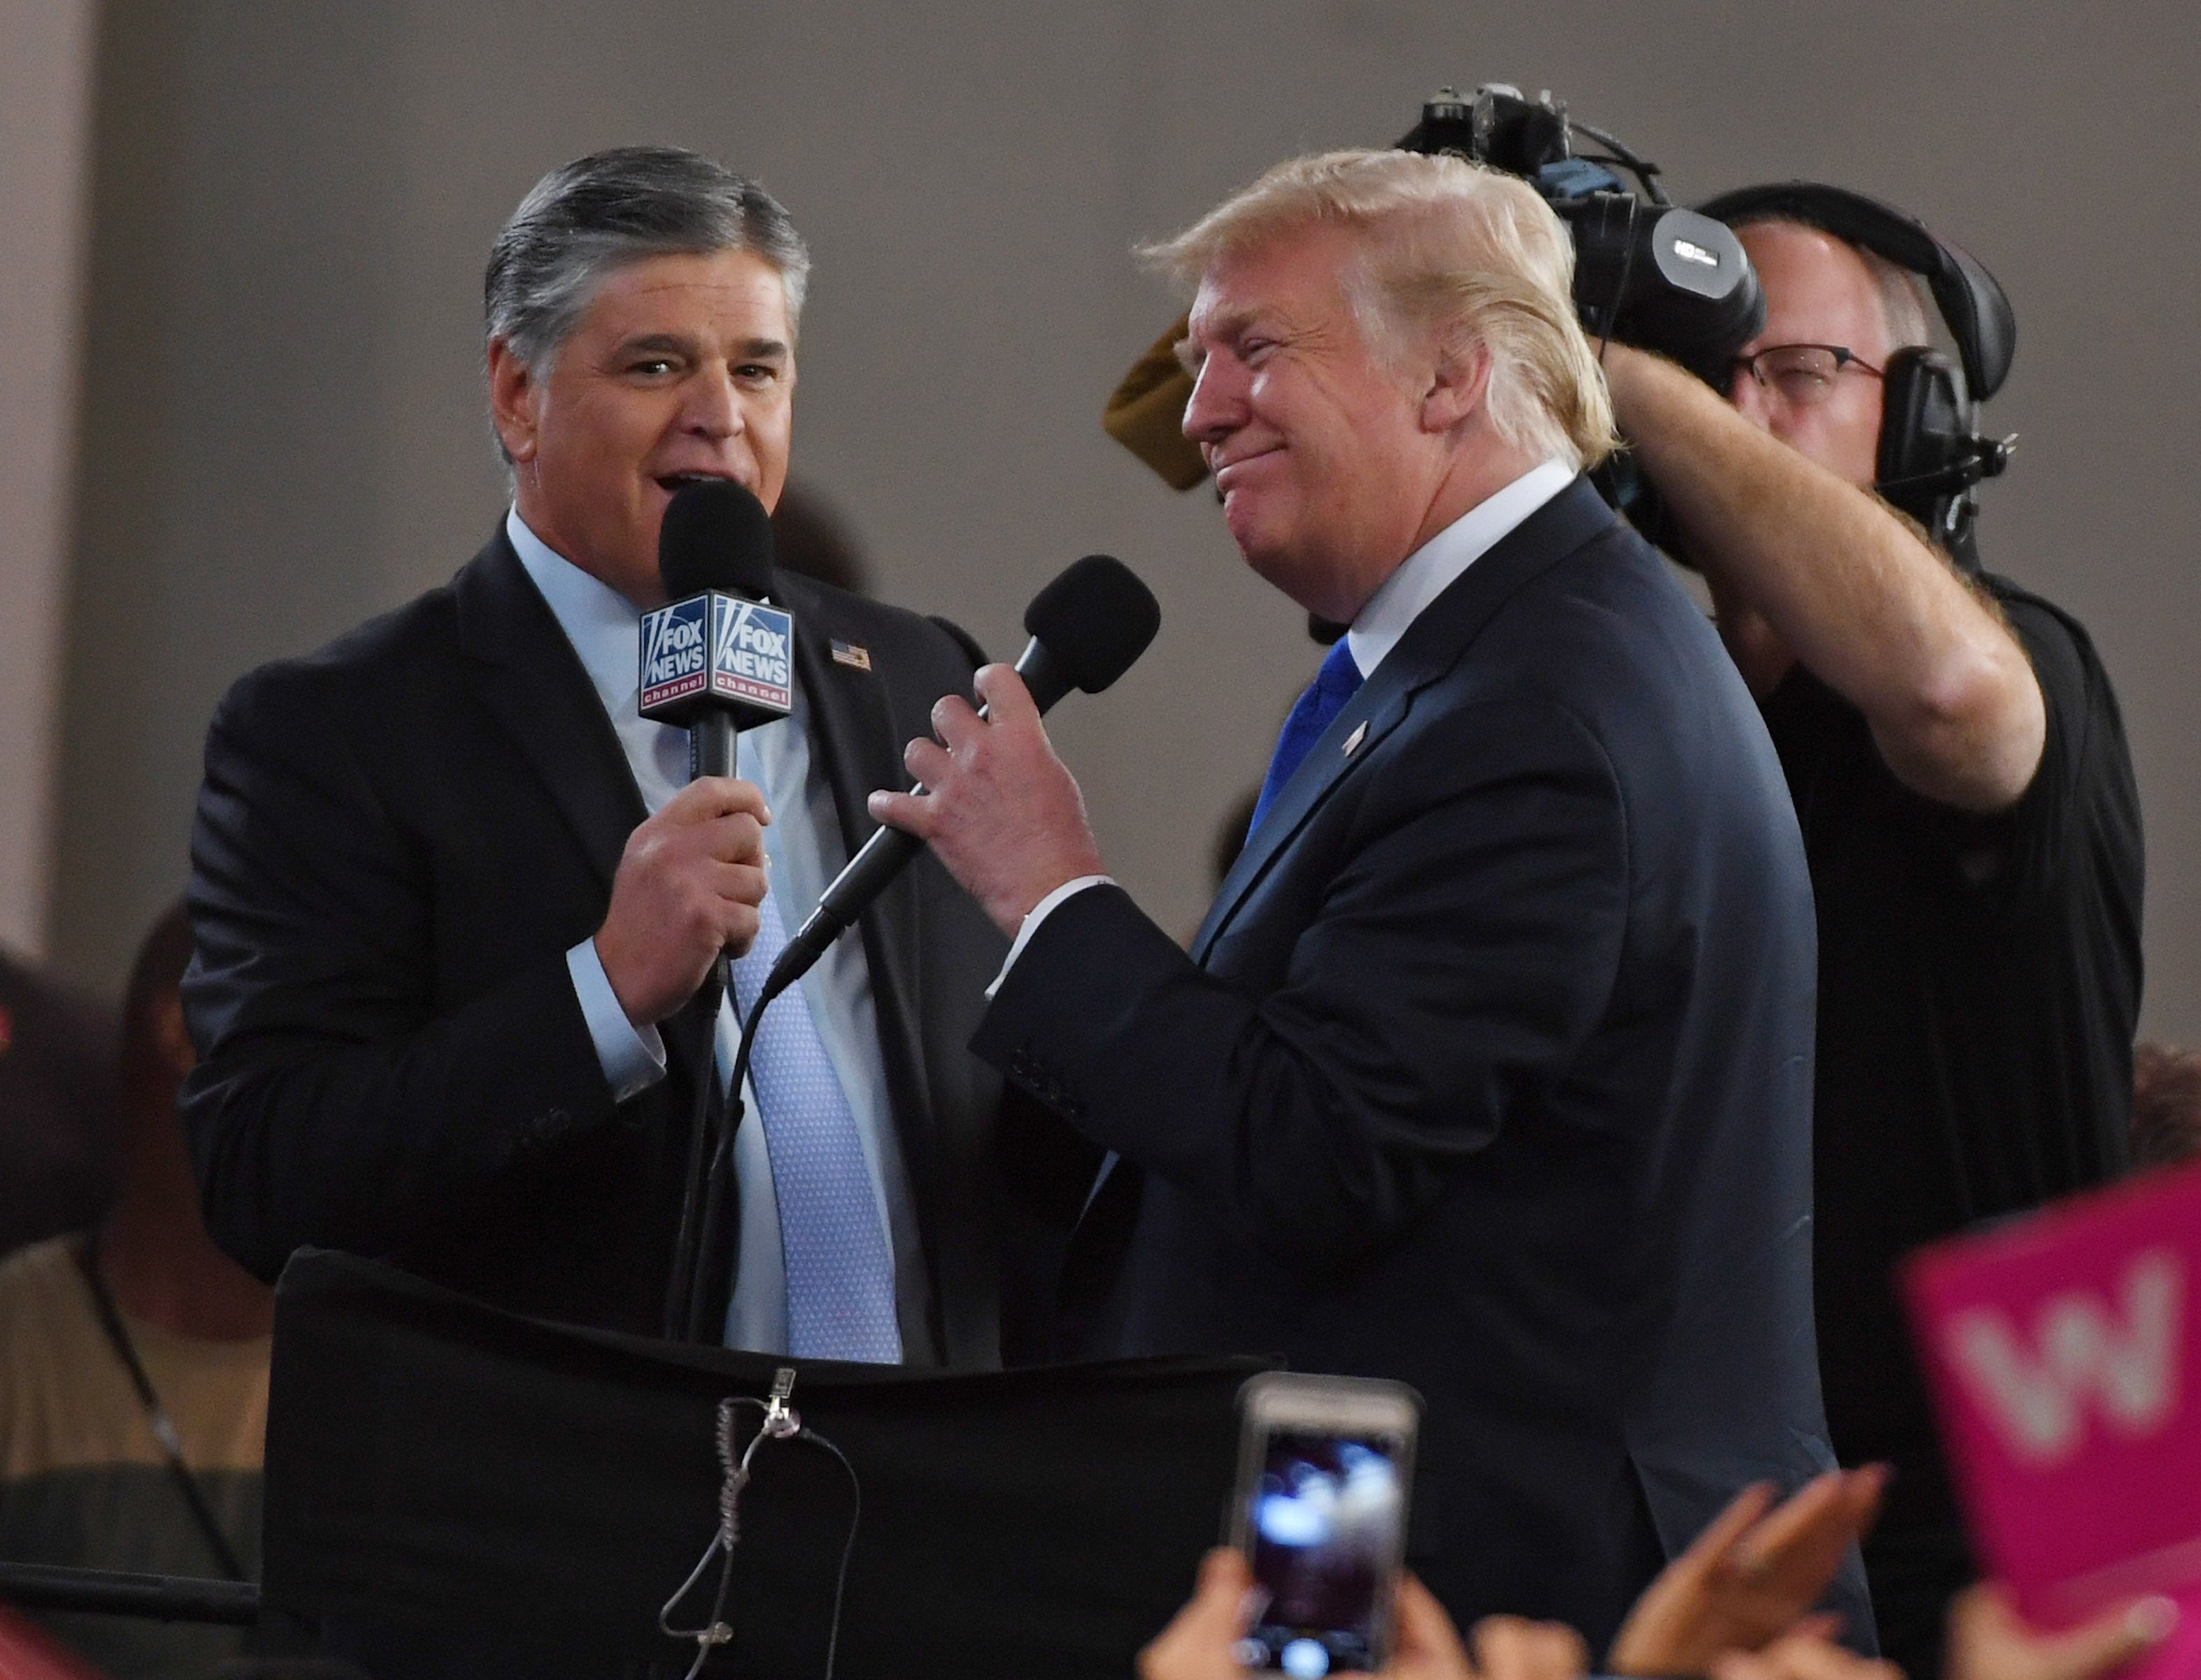 Mr Hannity and Mr Trump have been friends for years, and now own houses within a six-minute drive of each other